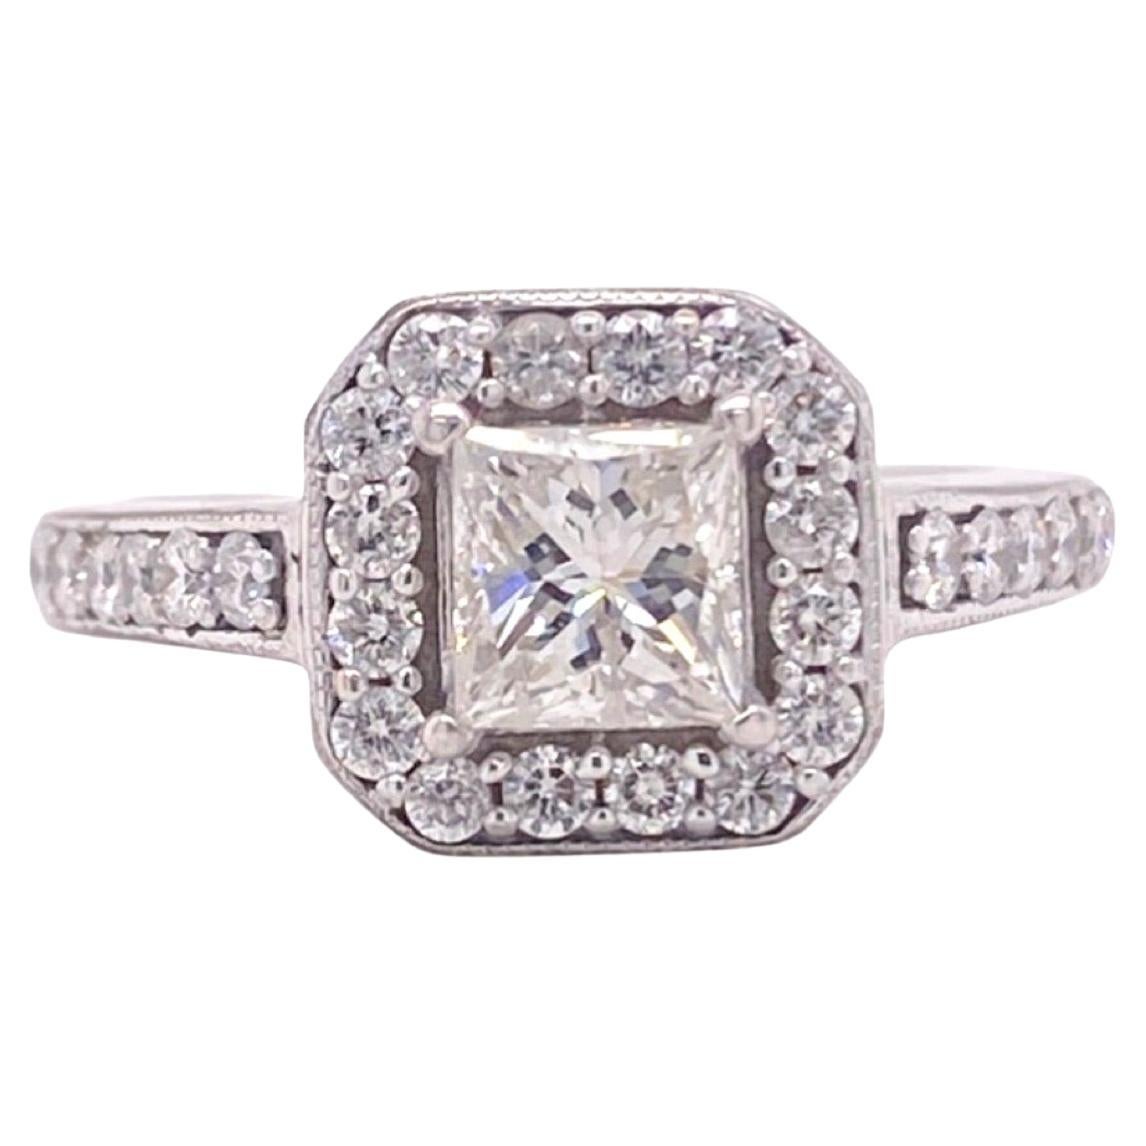 Princess Cut Diamond Halo Engagement Ring 1.45 Tcw 14kt White Gold For Sale